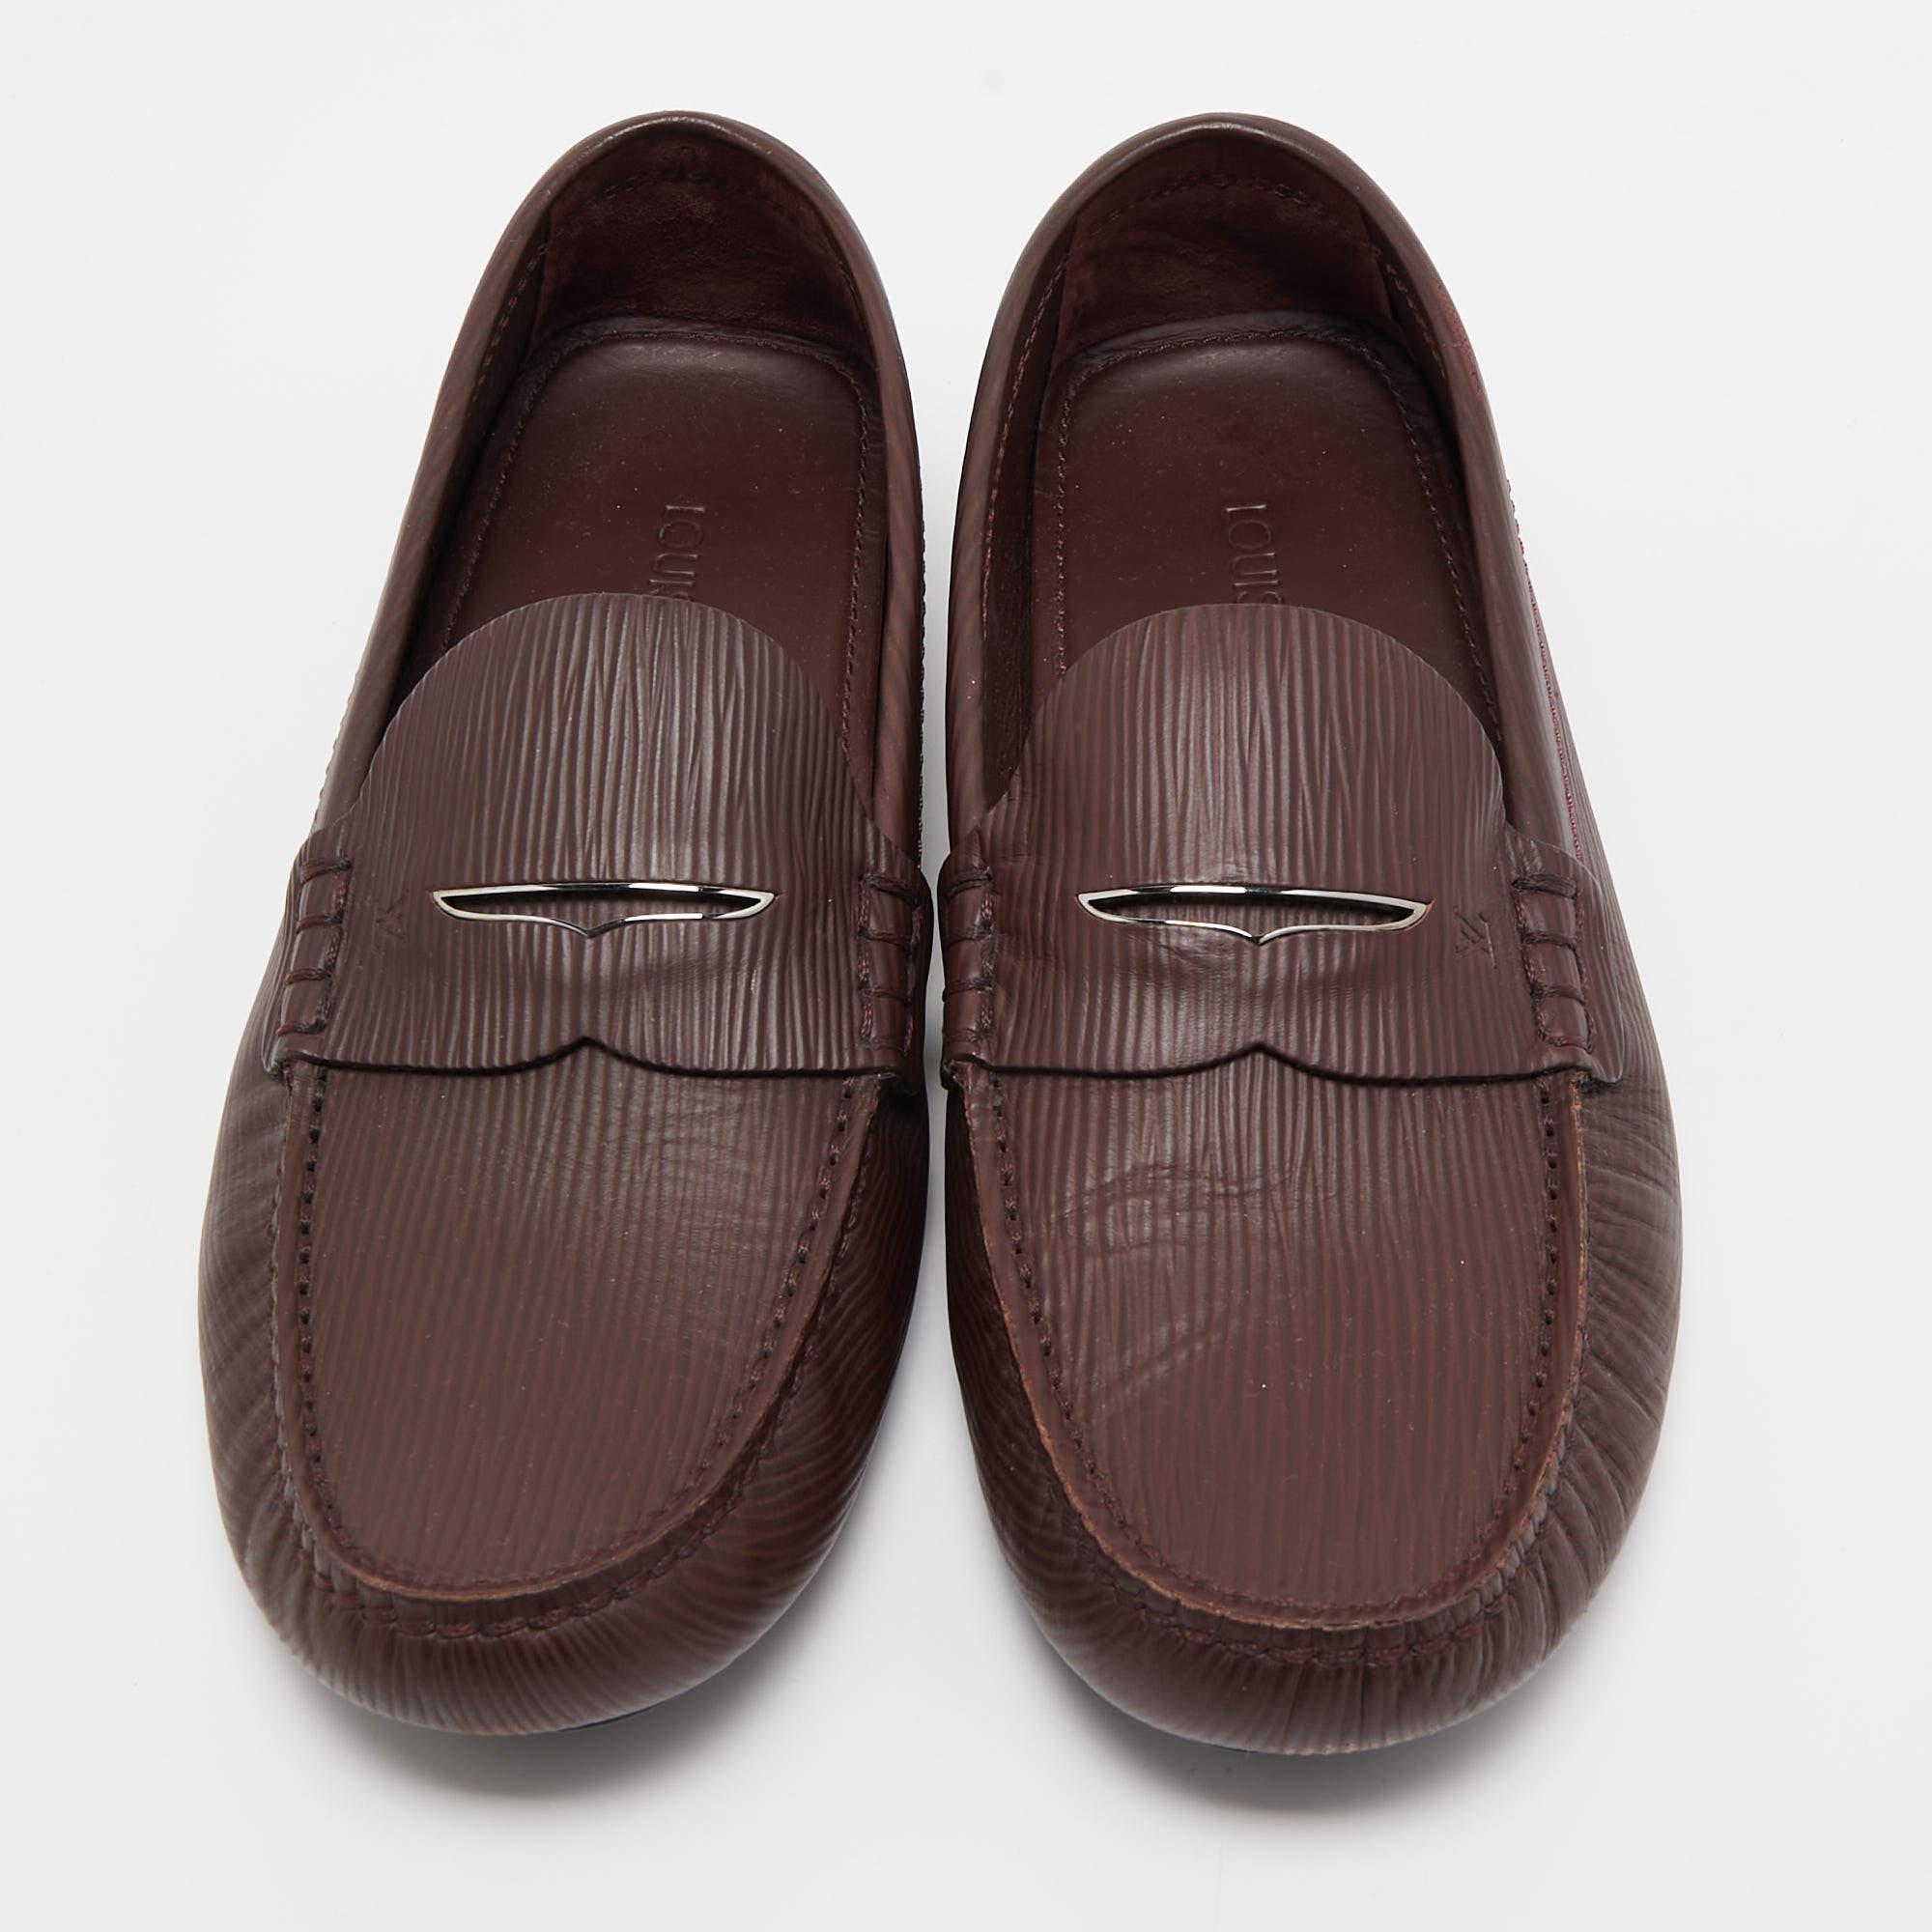 Louis Vuitton Burgundy Epi Leather Shade Penny Loafers Size 43 In Good Condition For Sale In Dubai, Al Qouz 2